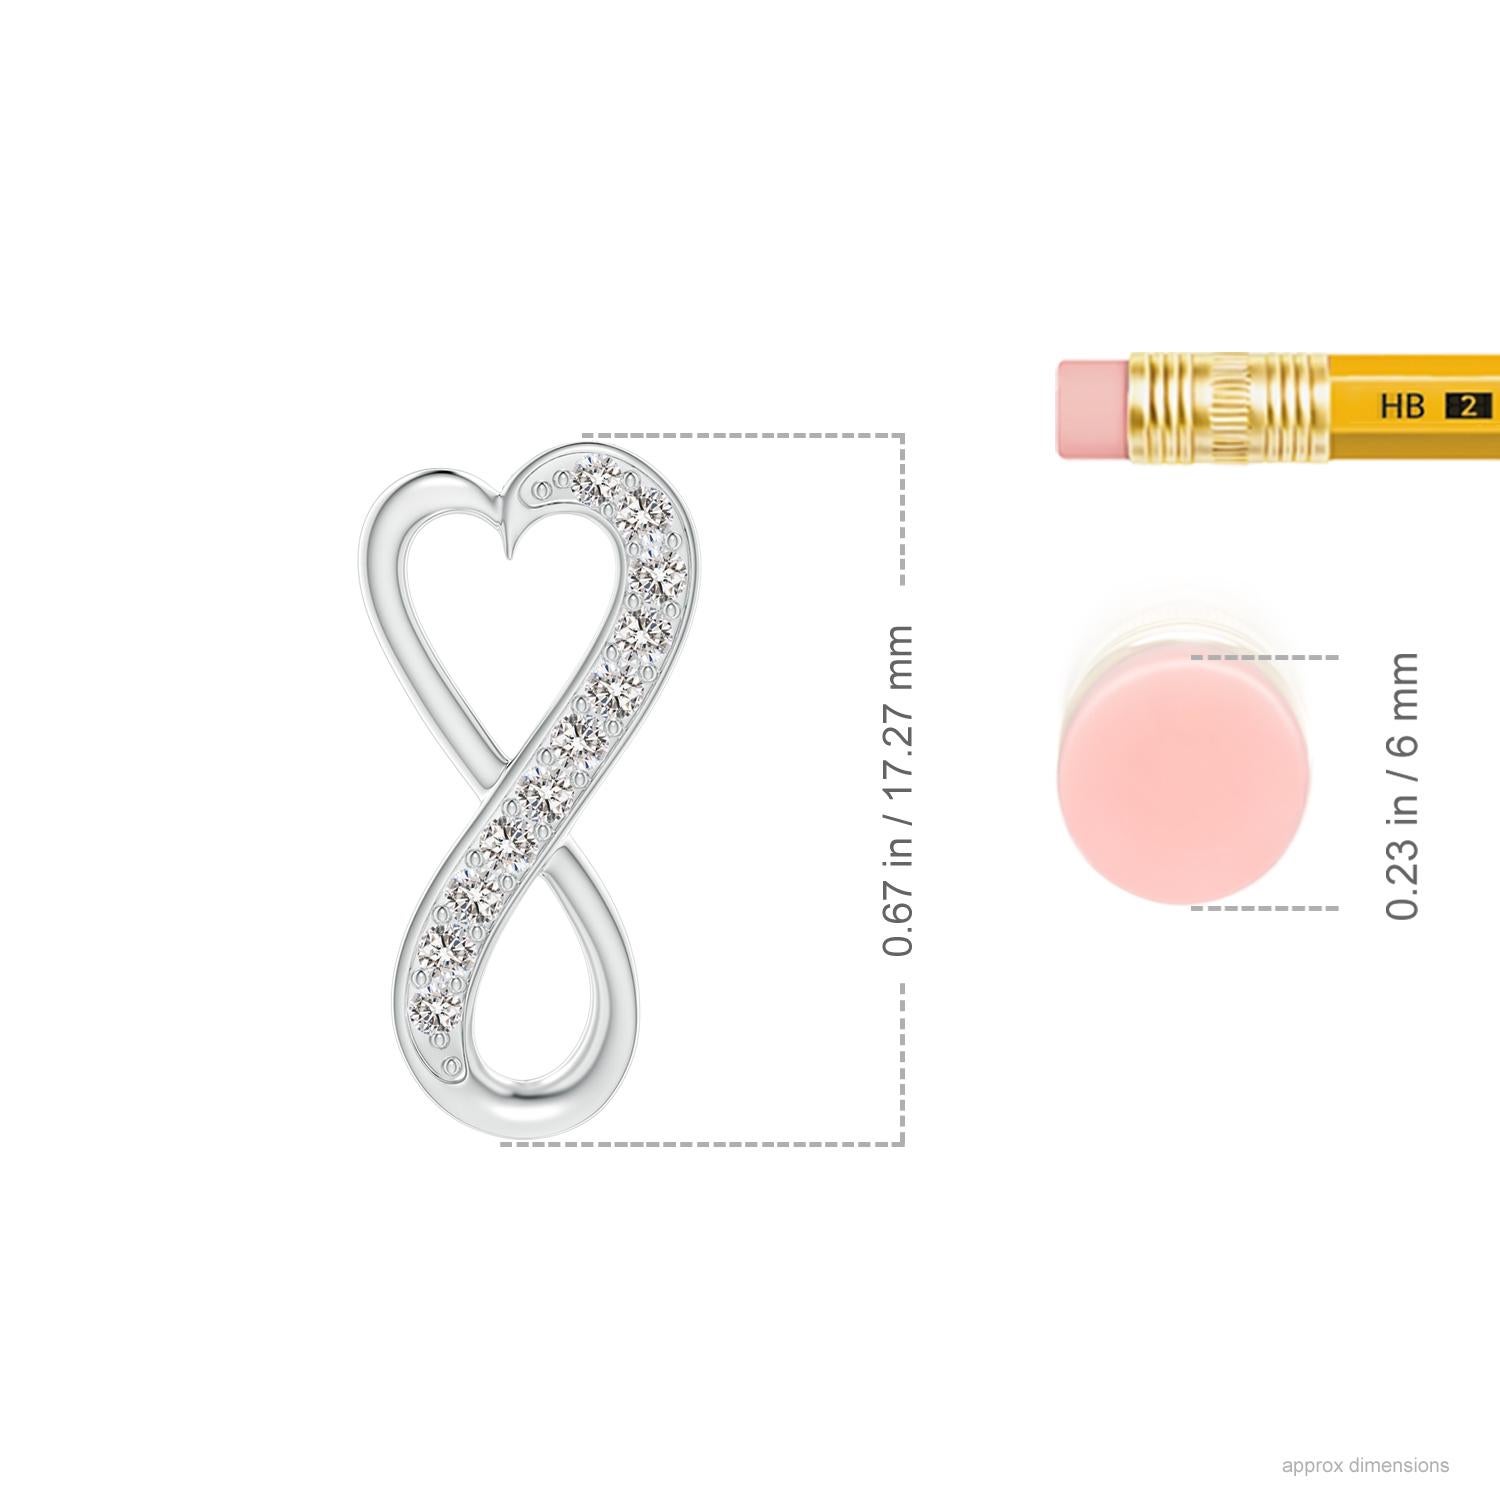 Designed with a hidden bale, this contemporary pendant features a heart frame that extends to form a stunning infinity. Shimmering diamonds partially accentuate the curves of this infinity heart pendant. It is skillfully crafted in patinum.
Diamond